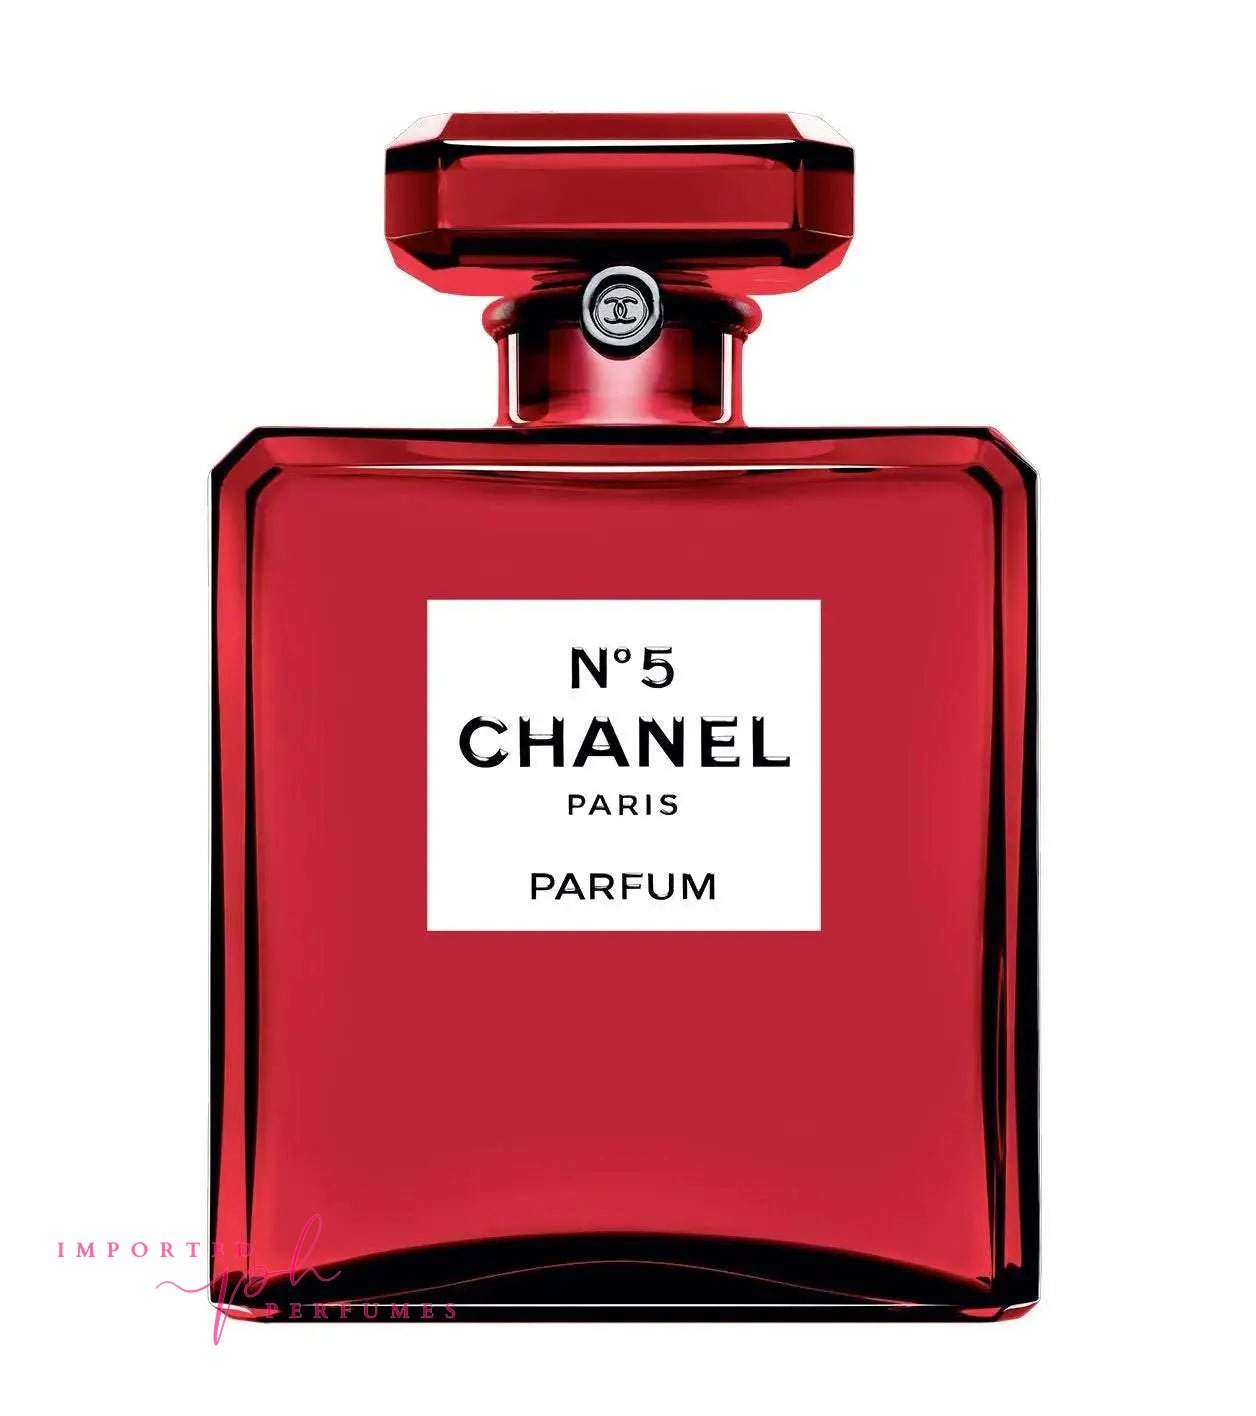 [TESTER] Chanel No 5 L'Eau Red Edition Chanel For Women 100ml-Imported Perfumes Co-chanel,for women,TESTER,women